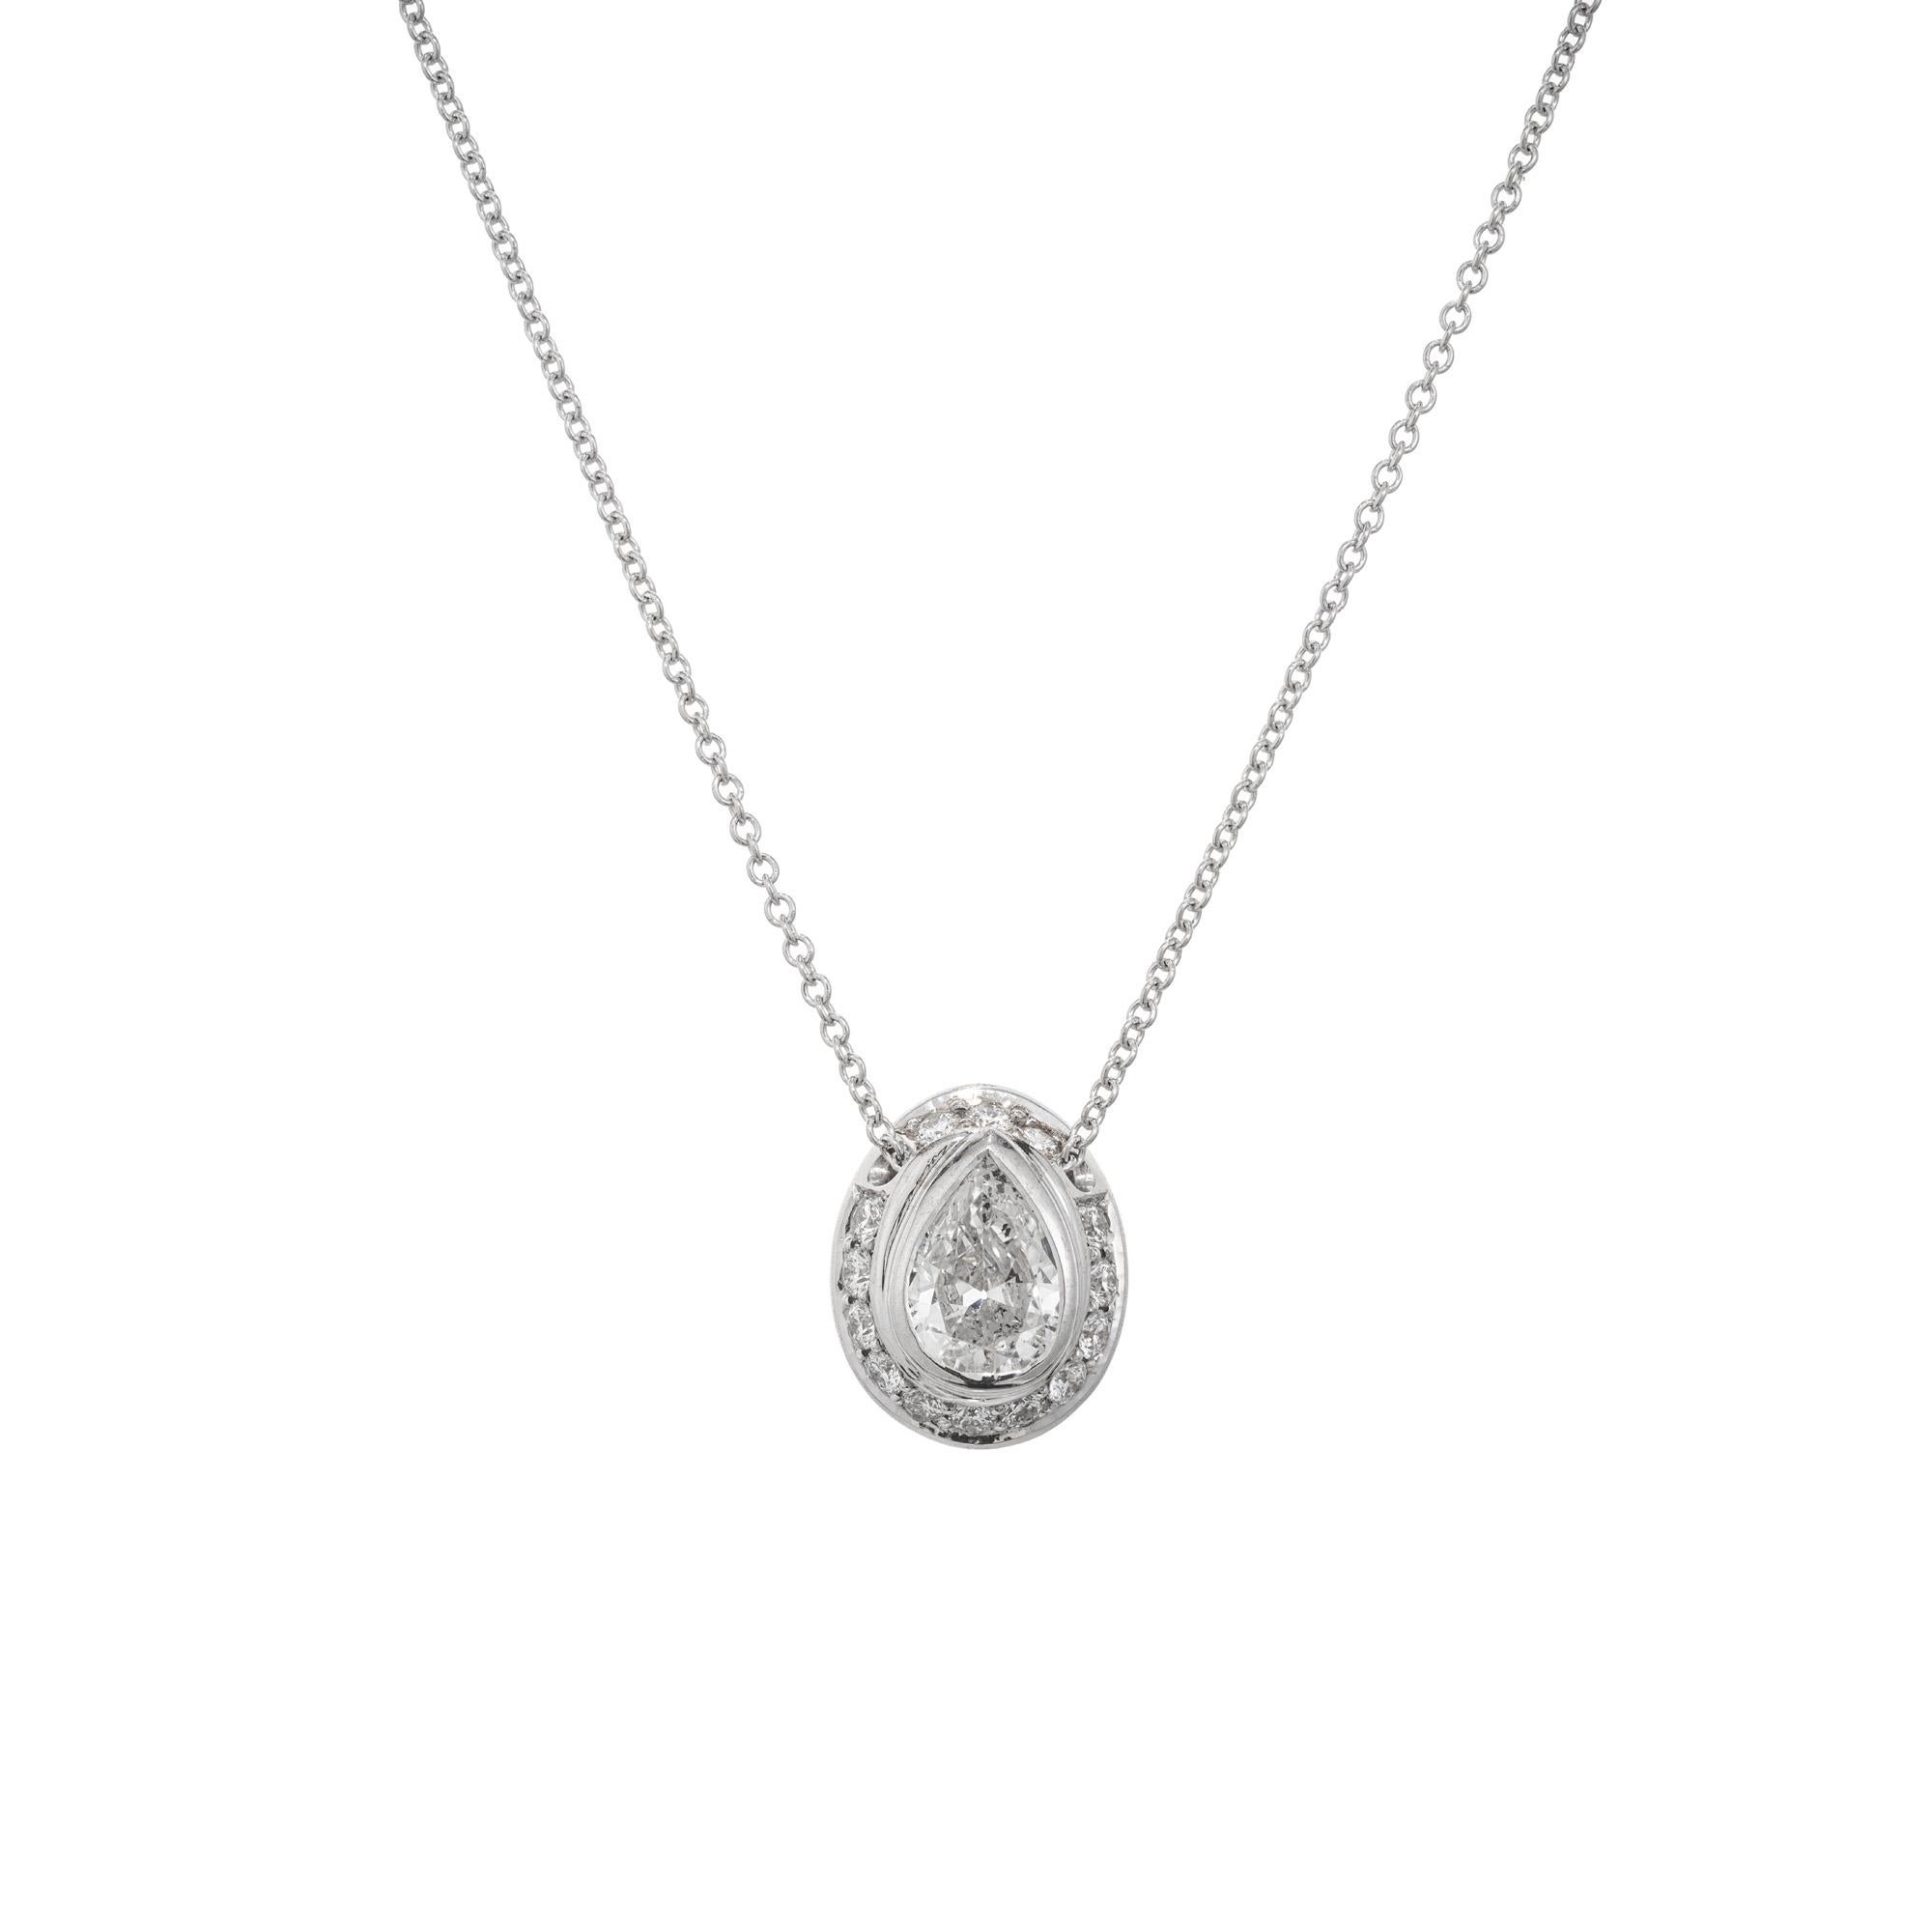 Custom made oval Diamond halo slide pendant necklace. EGL certified near colorless,  69ct pear shaped diamond, mounted in a bezel set 18k white gold setting. Accented with a halo of 13 round cut diamonds. 18 inch 18k white gold chain. Designed and